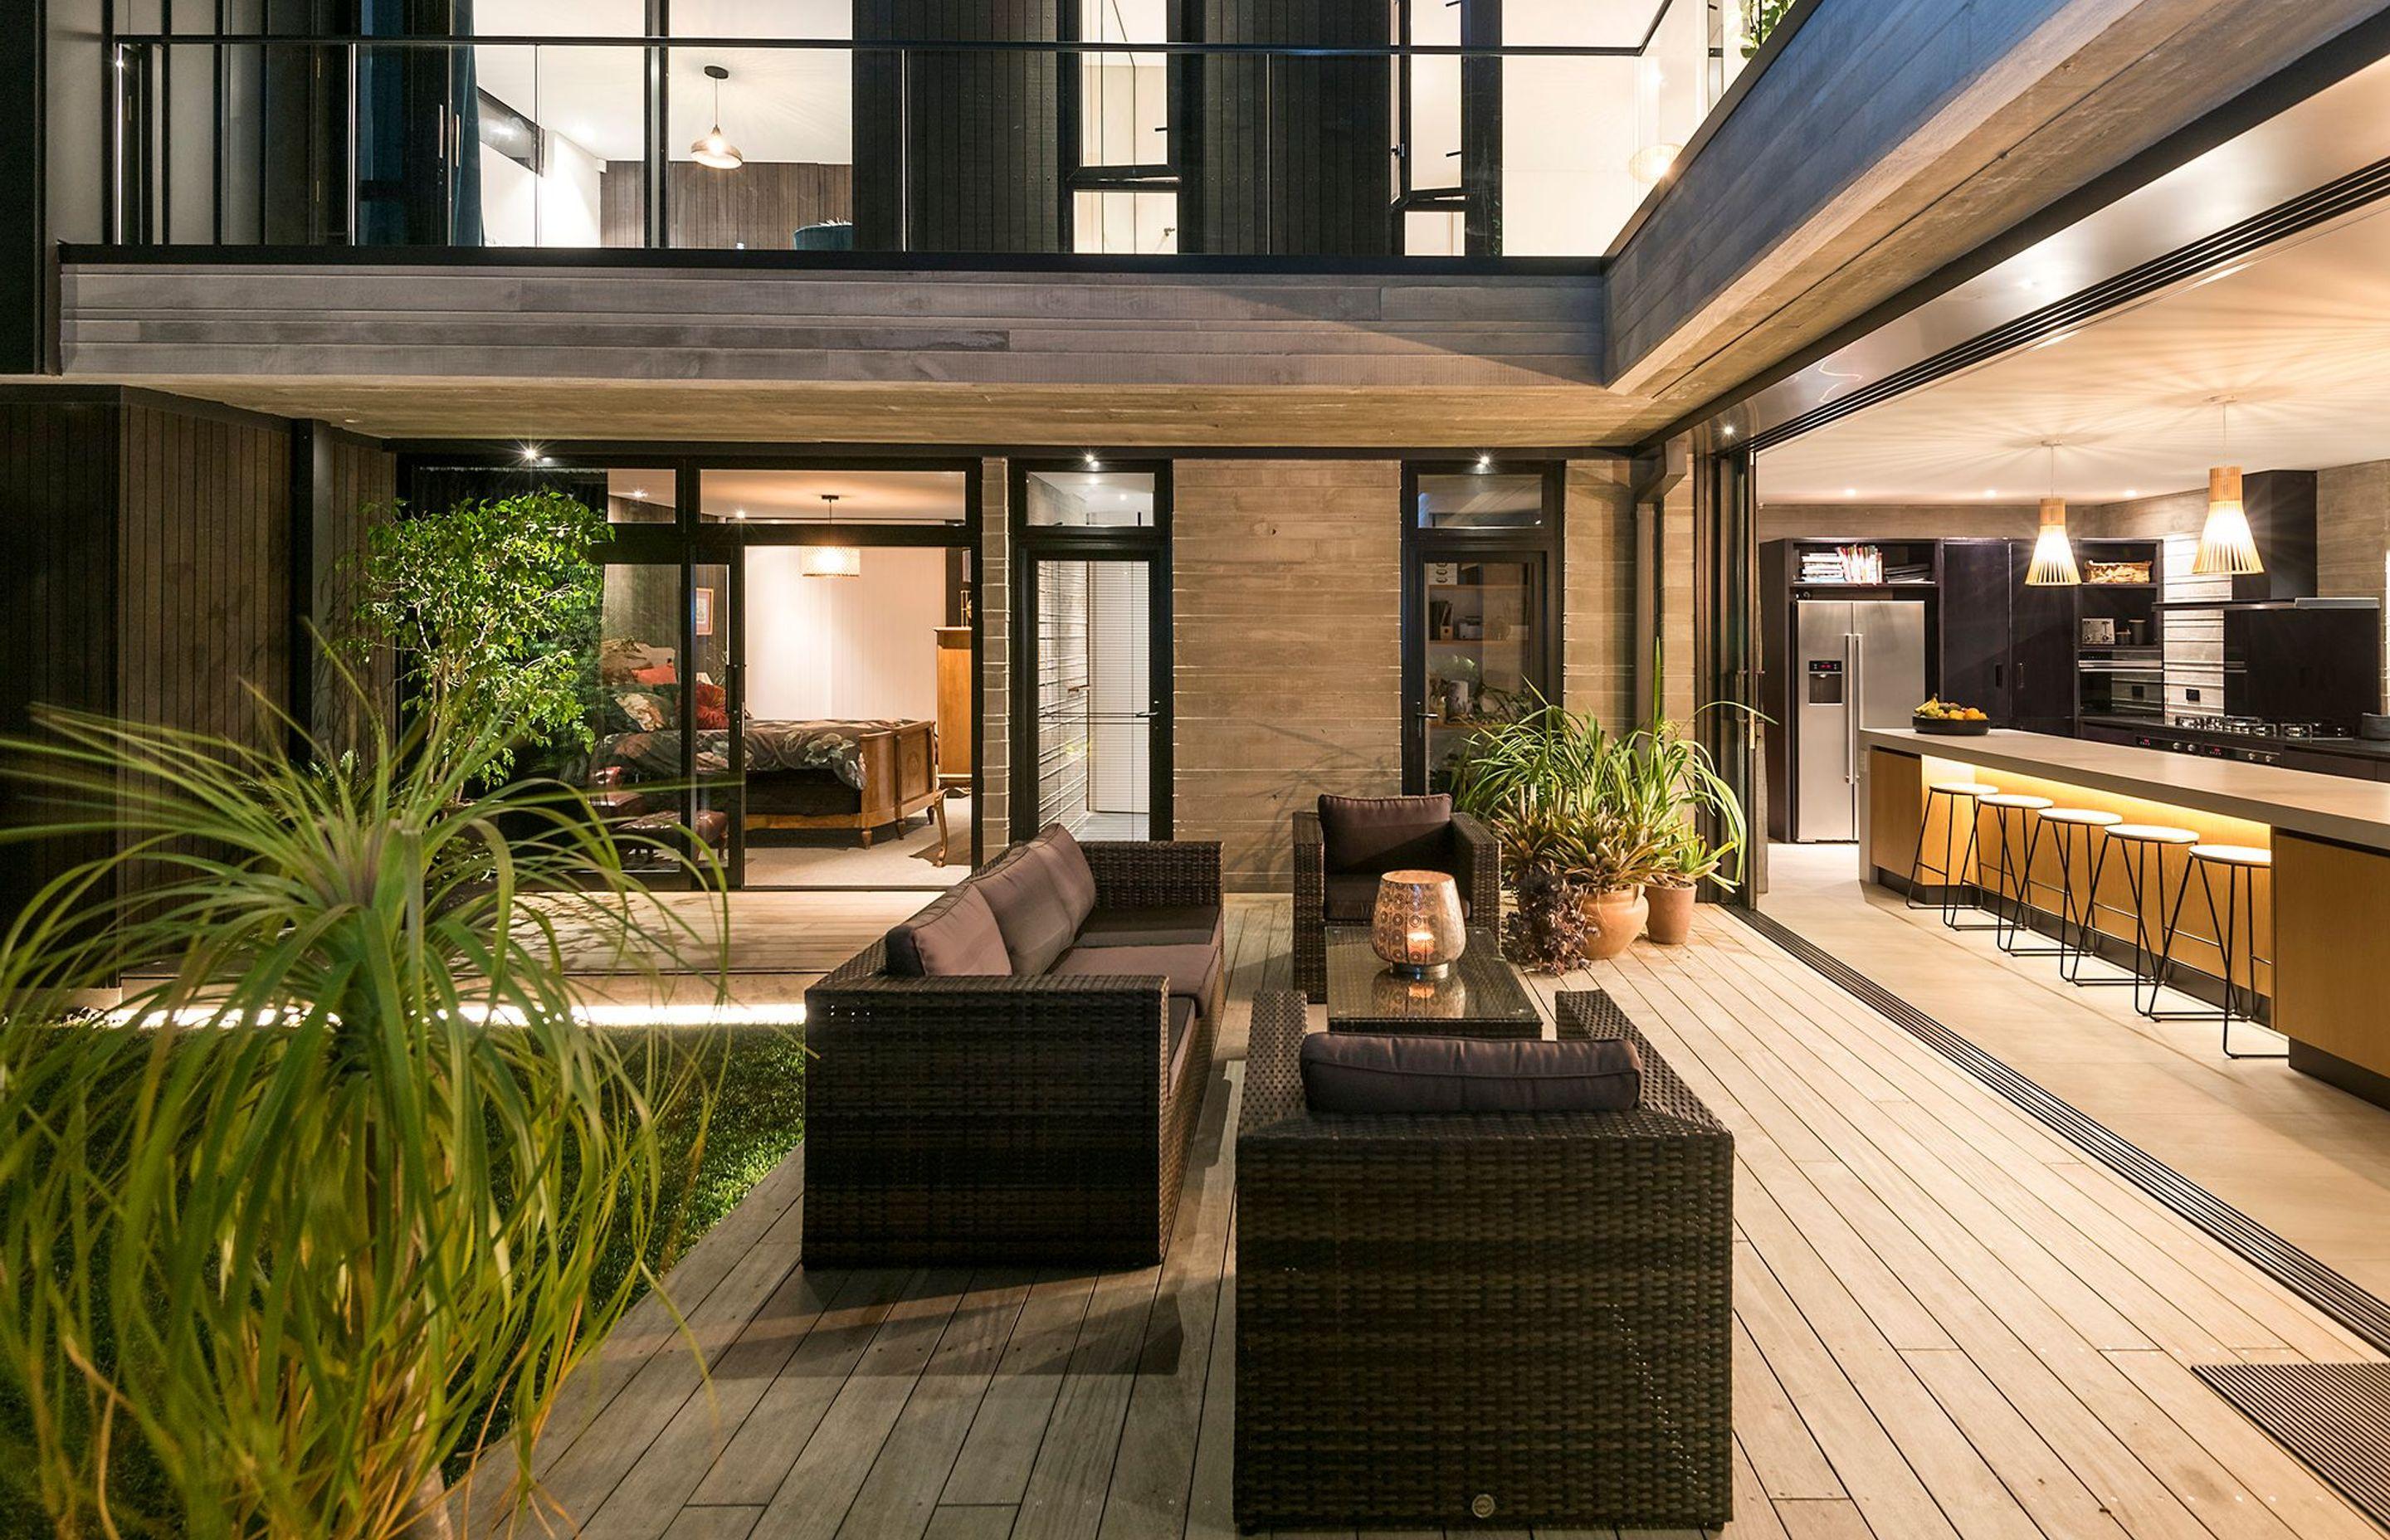 A sheltered courtyard provides the perfect lounge area for evening drinks, linking to both the kitchen, the scullery, and the guest bedroom and bathroom.